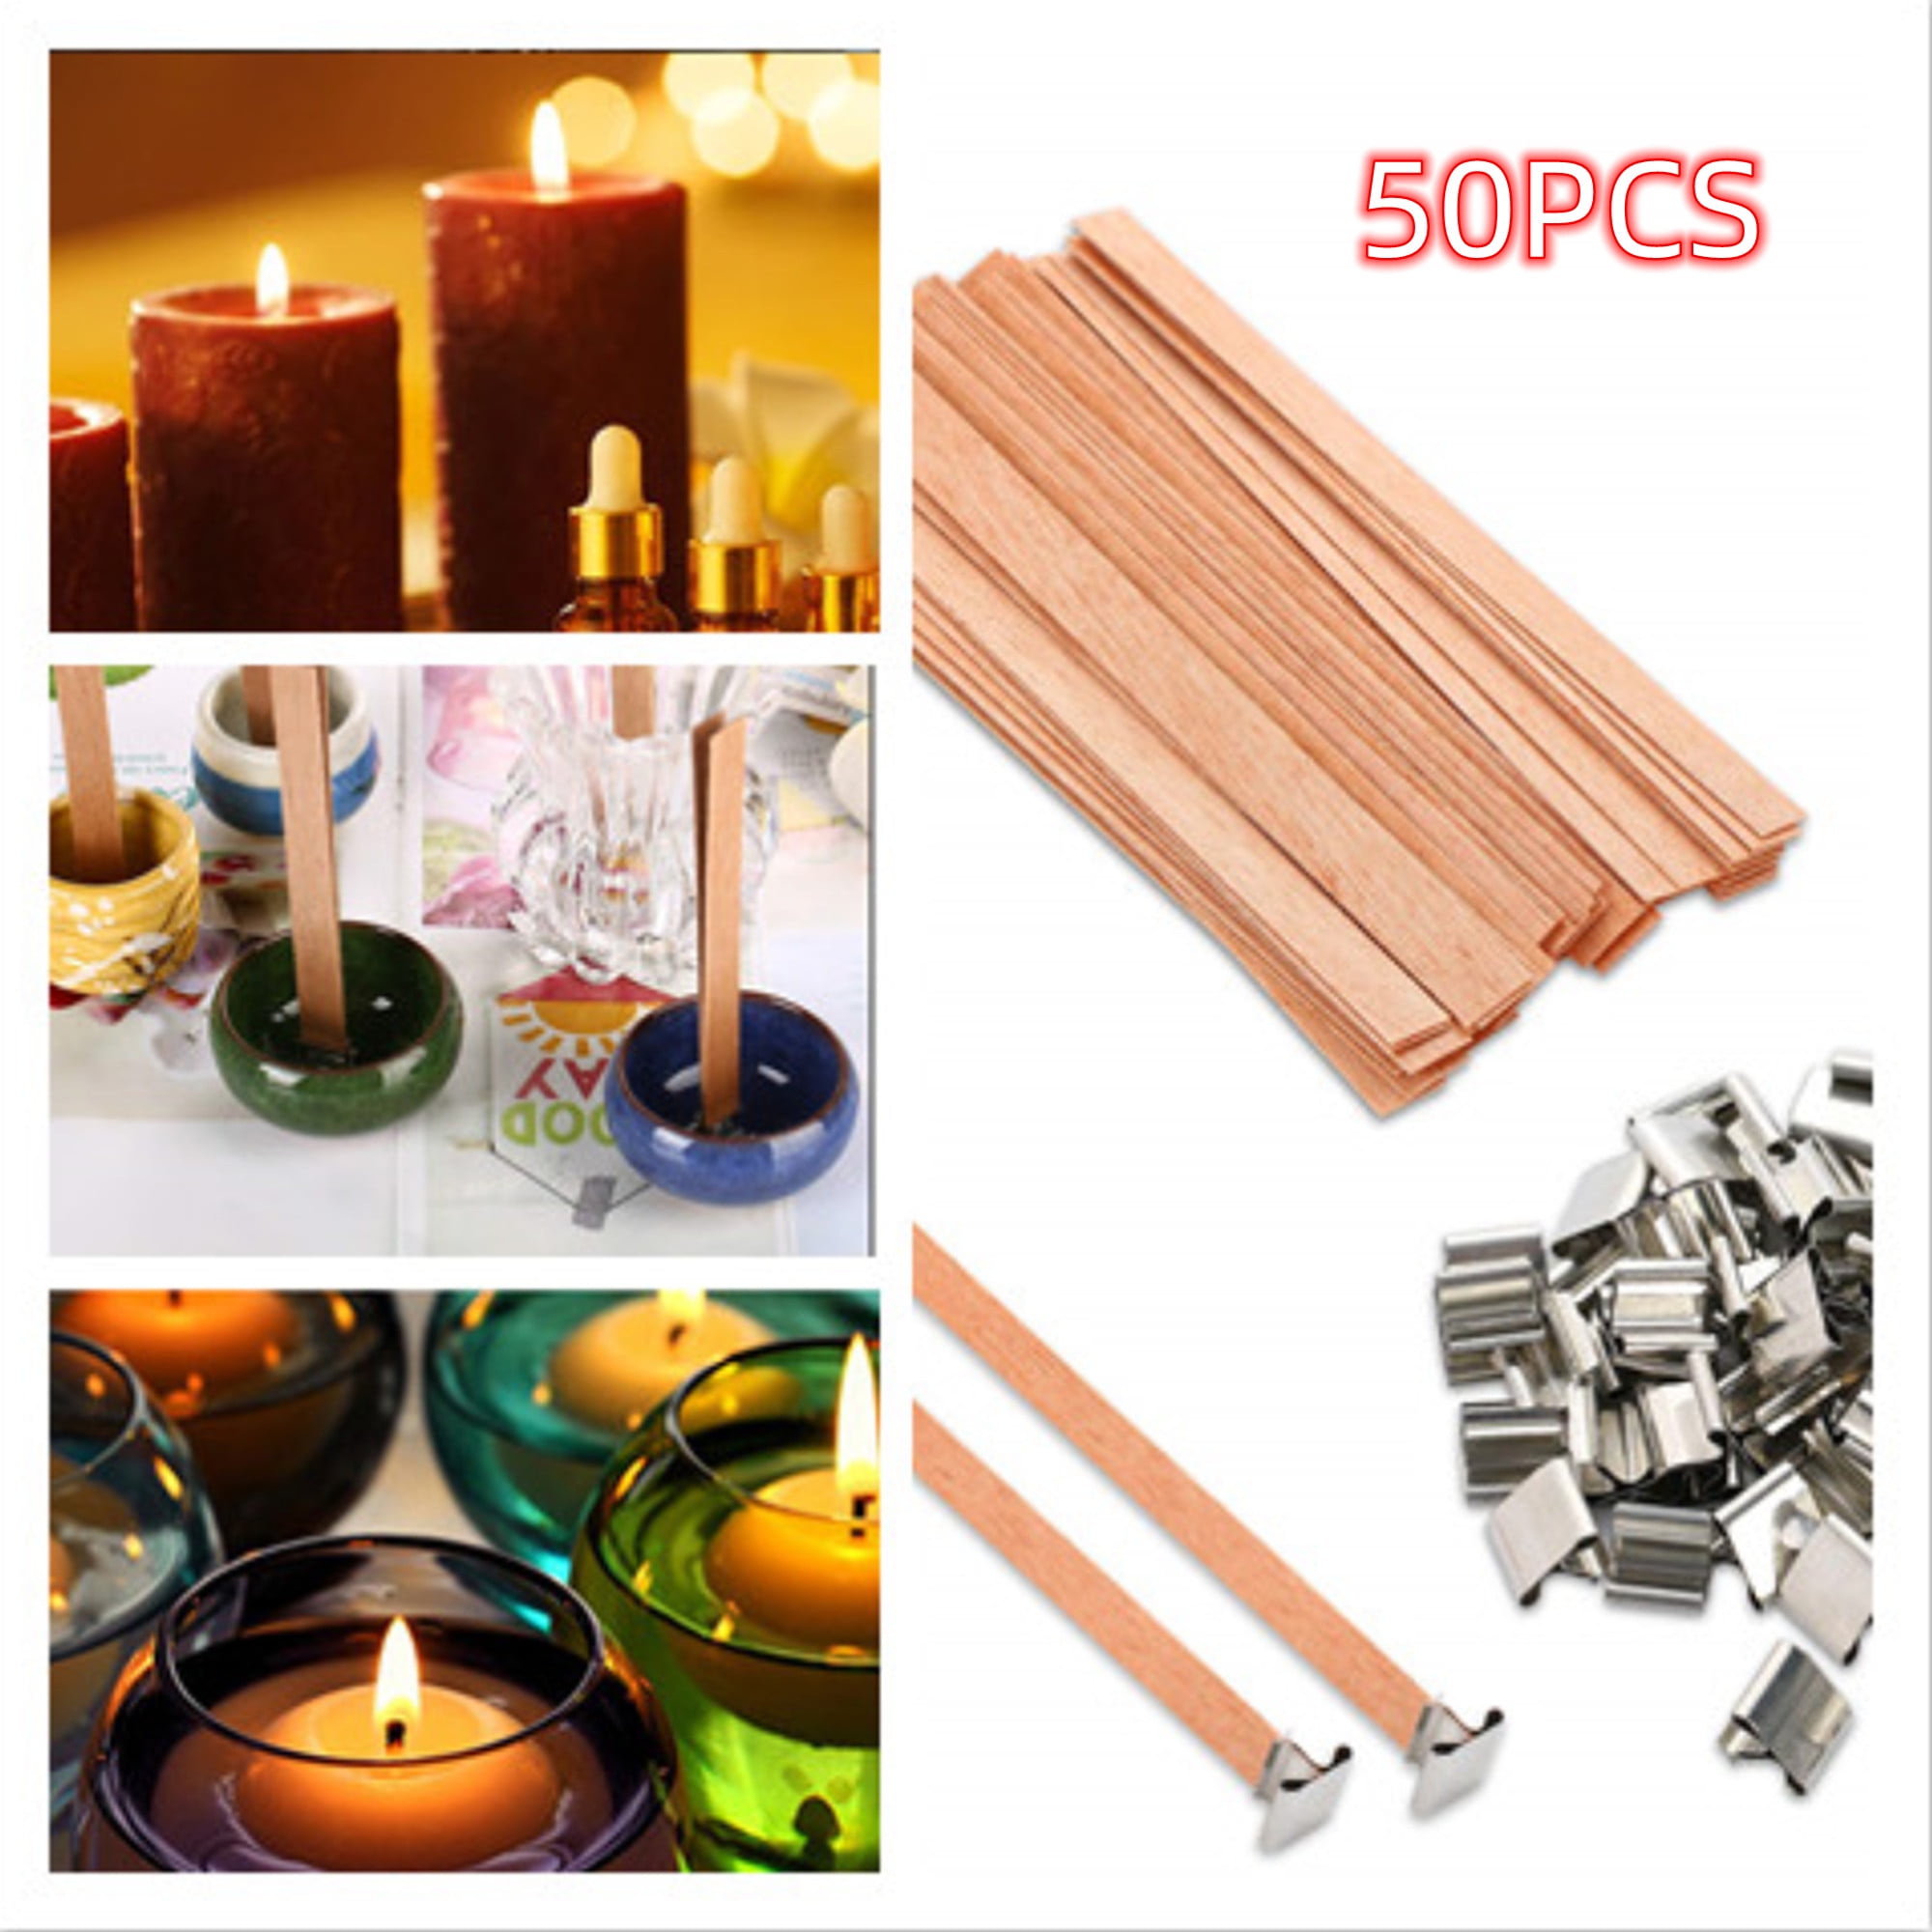 Wooden Wicks with Clips for DIY Candle Making Craft Natural Safe Wood Candle Wicks with Metal Base Candle Cores with Iron Stands Wooden Wicks Candle Making Supplies 2x9cm 8Pcs Lenisc 0.79x3.54inch 